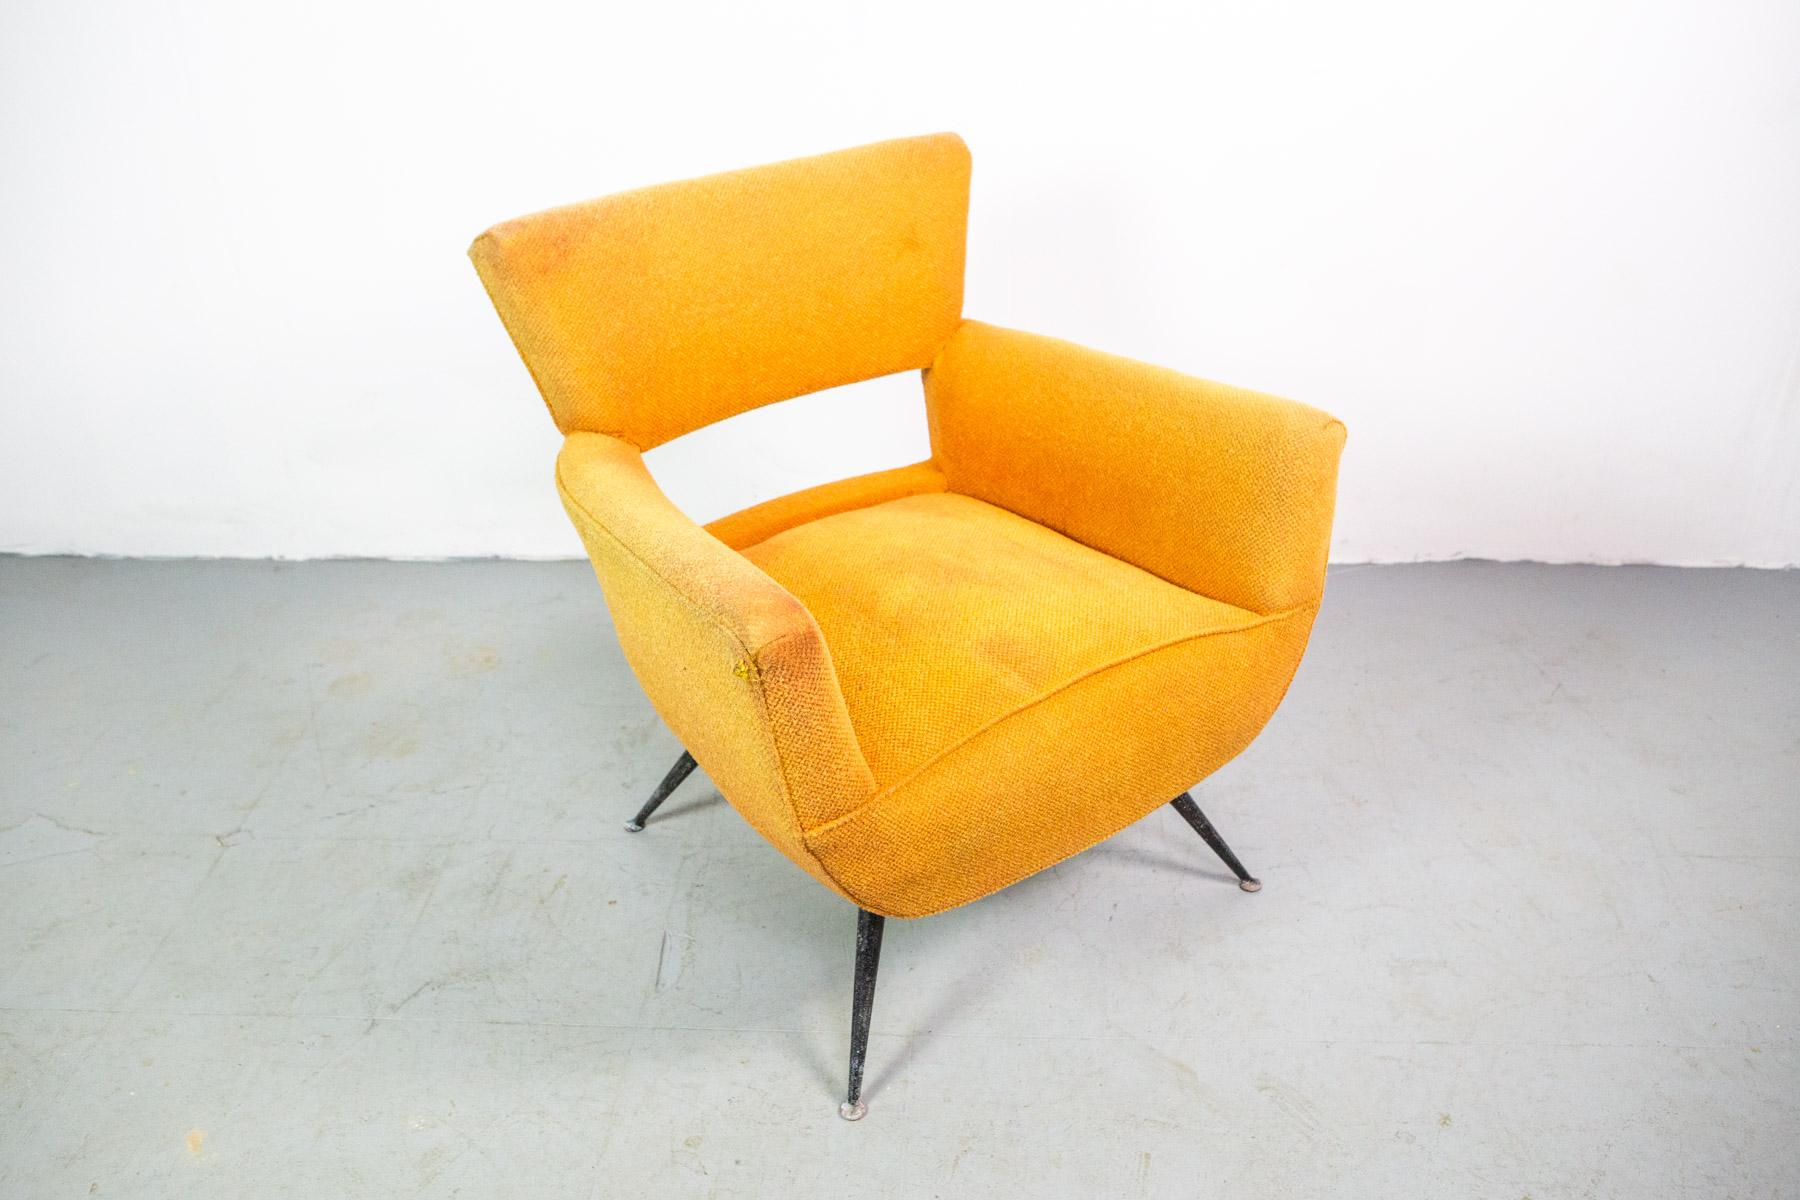 Rare single lounge chair by Henry Glass in vintage condition.
New upholstery can be made by us according to your wishes.